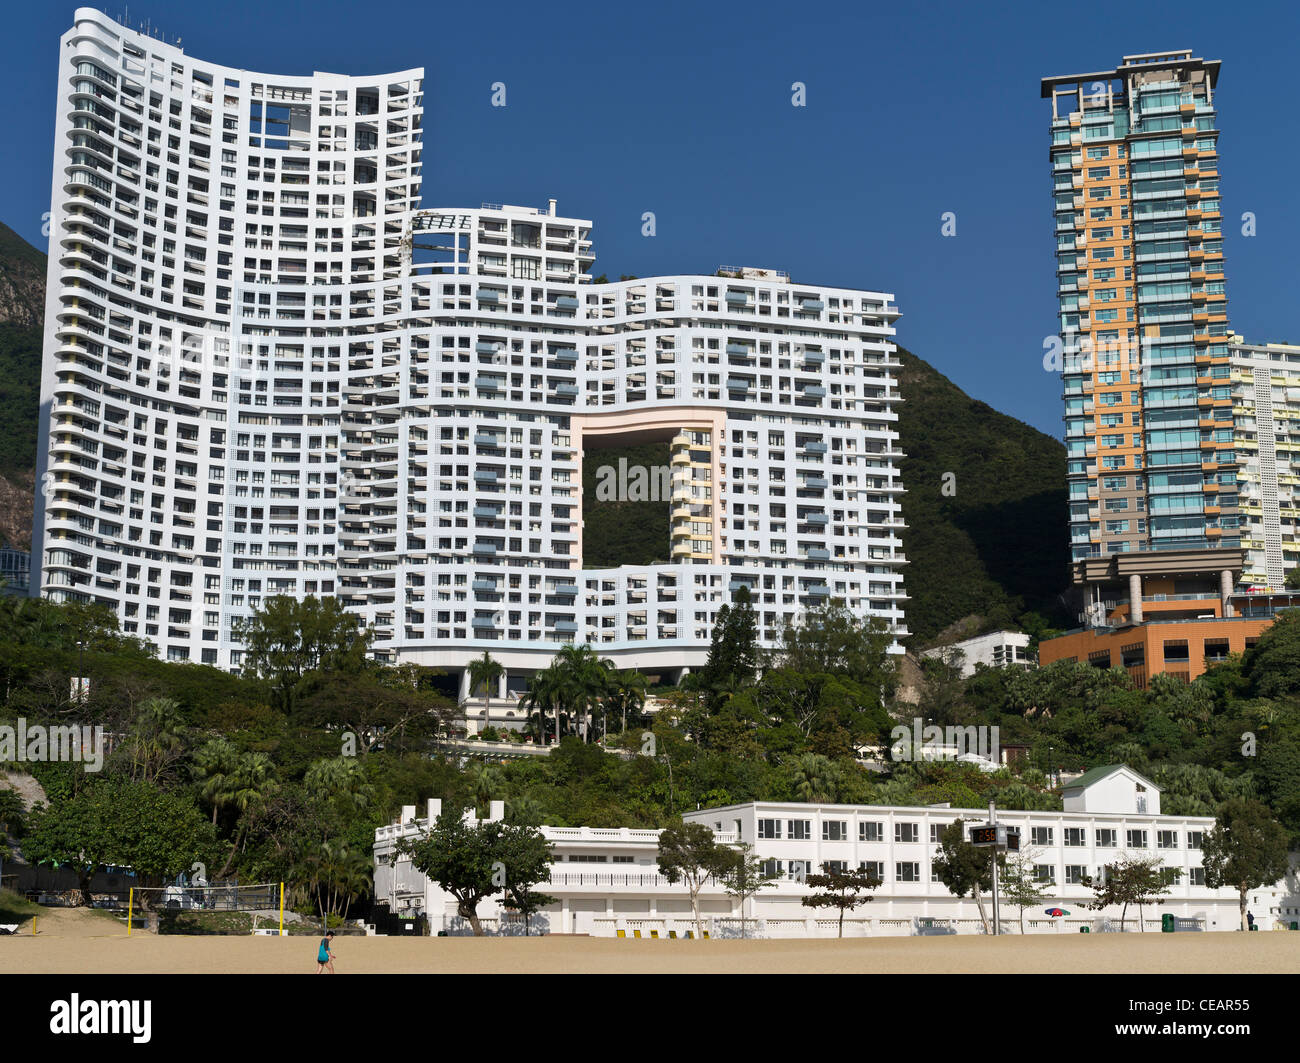 dh Feng shui REPULSE BAY HONG KONG Colonial building modern highrise fung shui hole chinese flats old new buildings china architecture residential Stock Photo